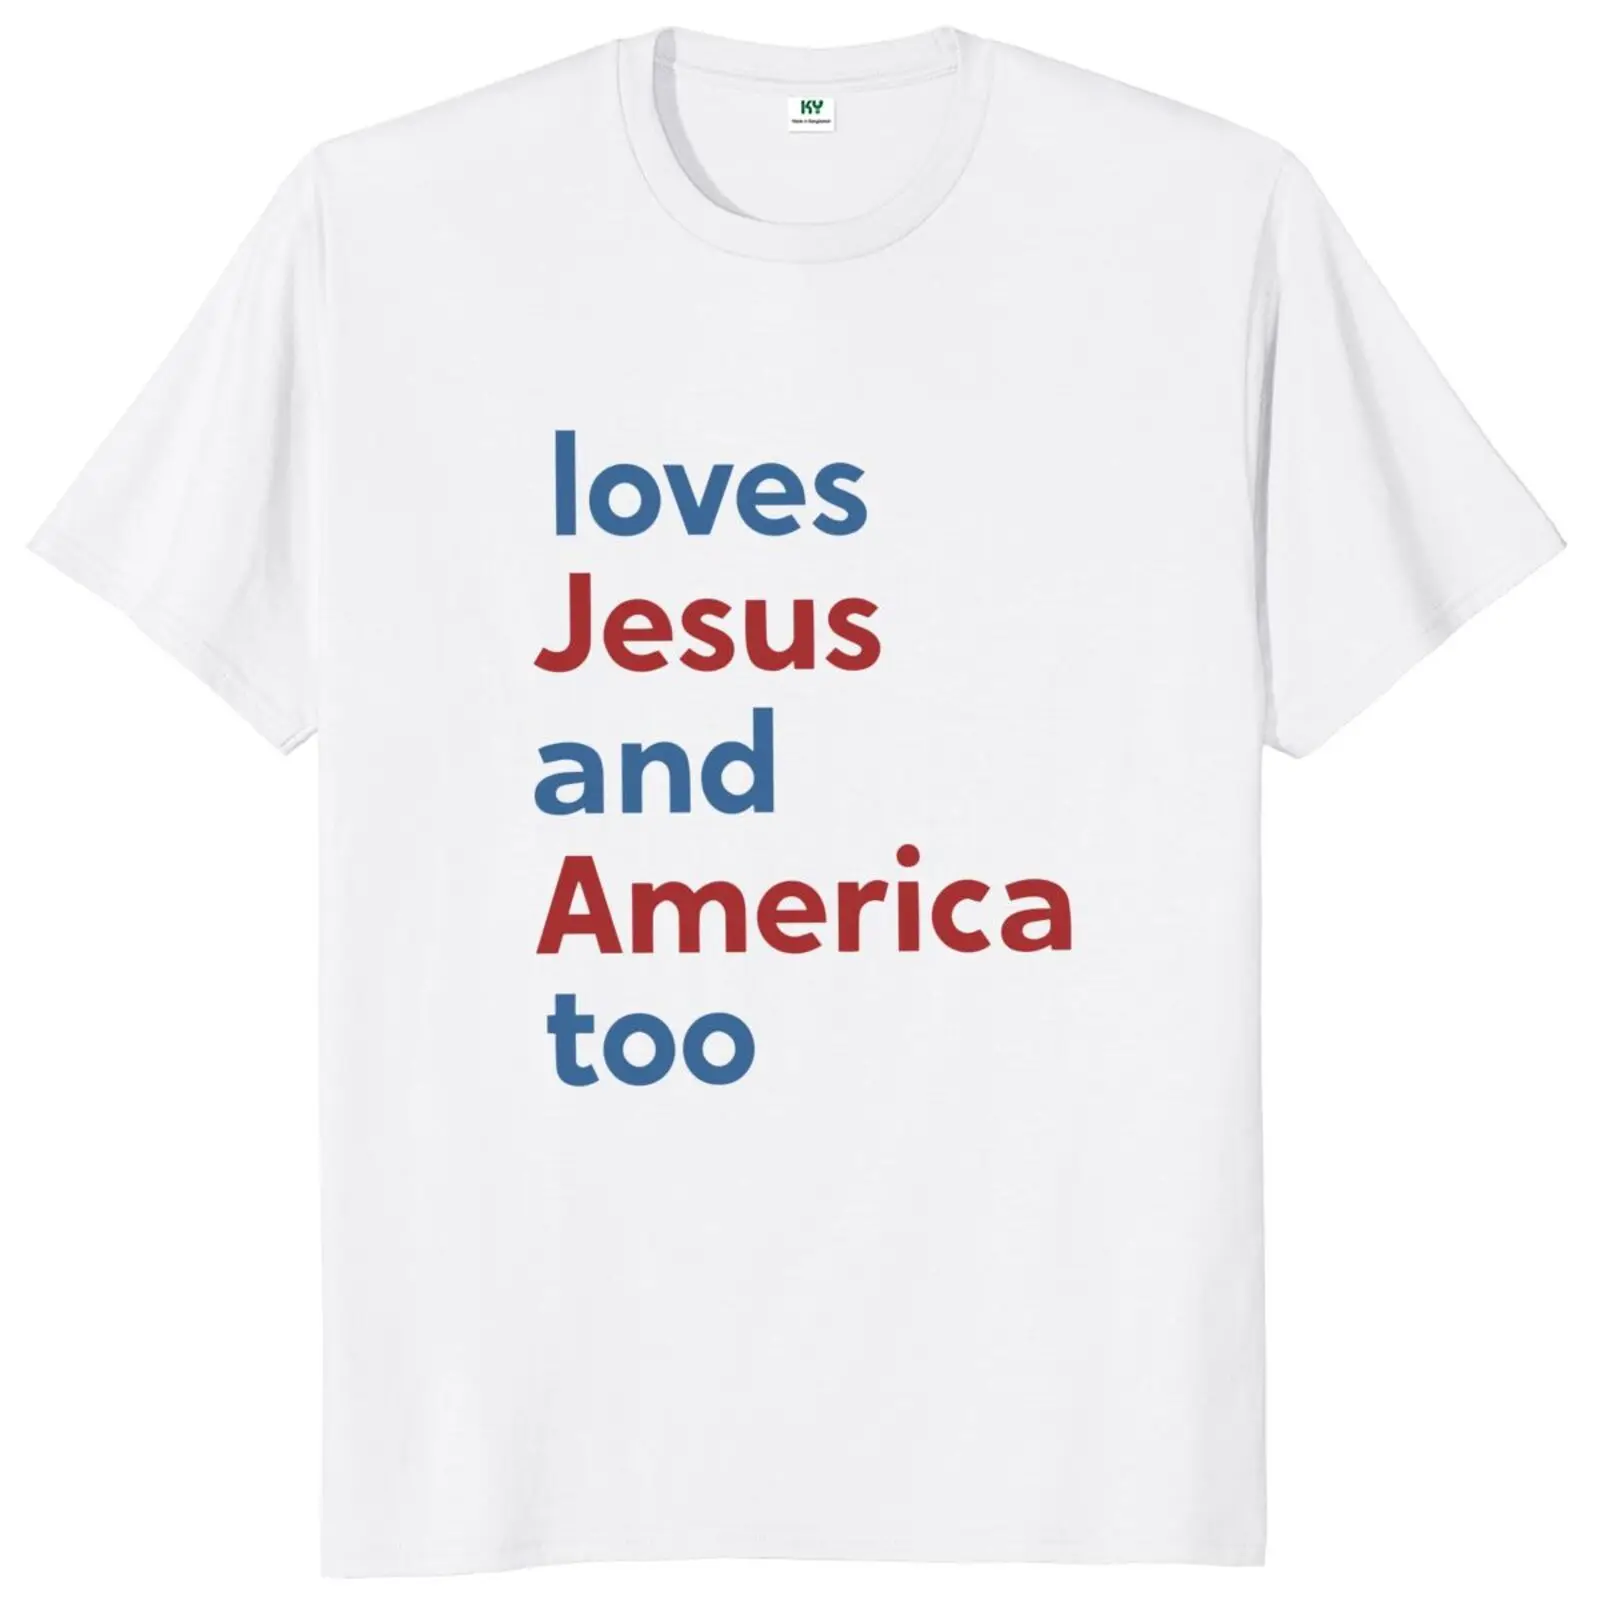 

Loves Jesus And America Too T Shirt American Pride Humor Gift T-shirts For Men Women Casual 100% Cotton Unisex O-neck Tops